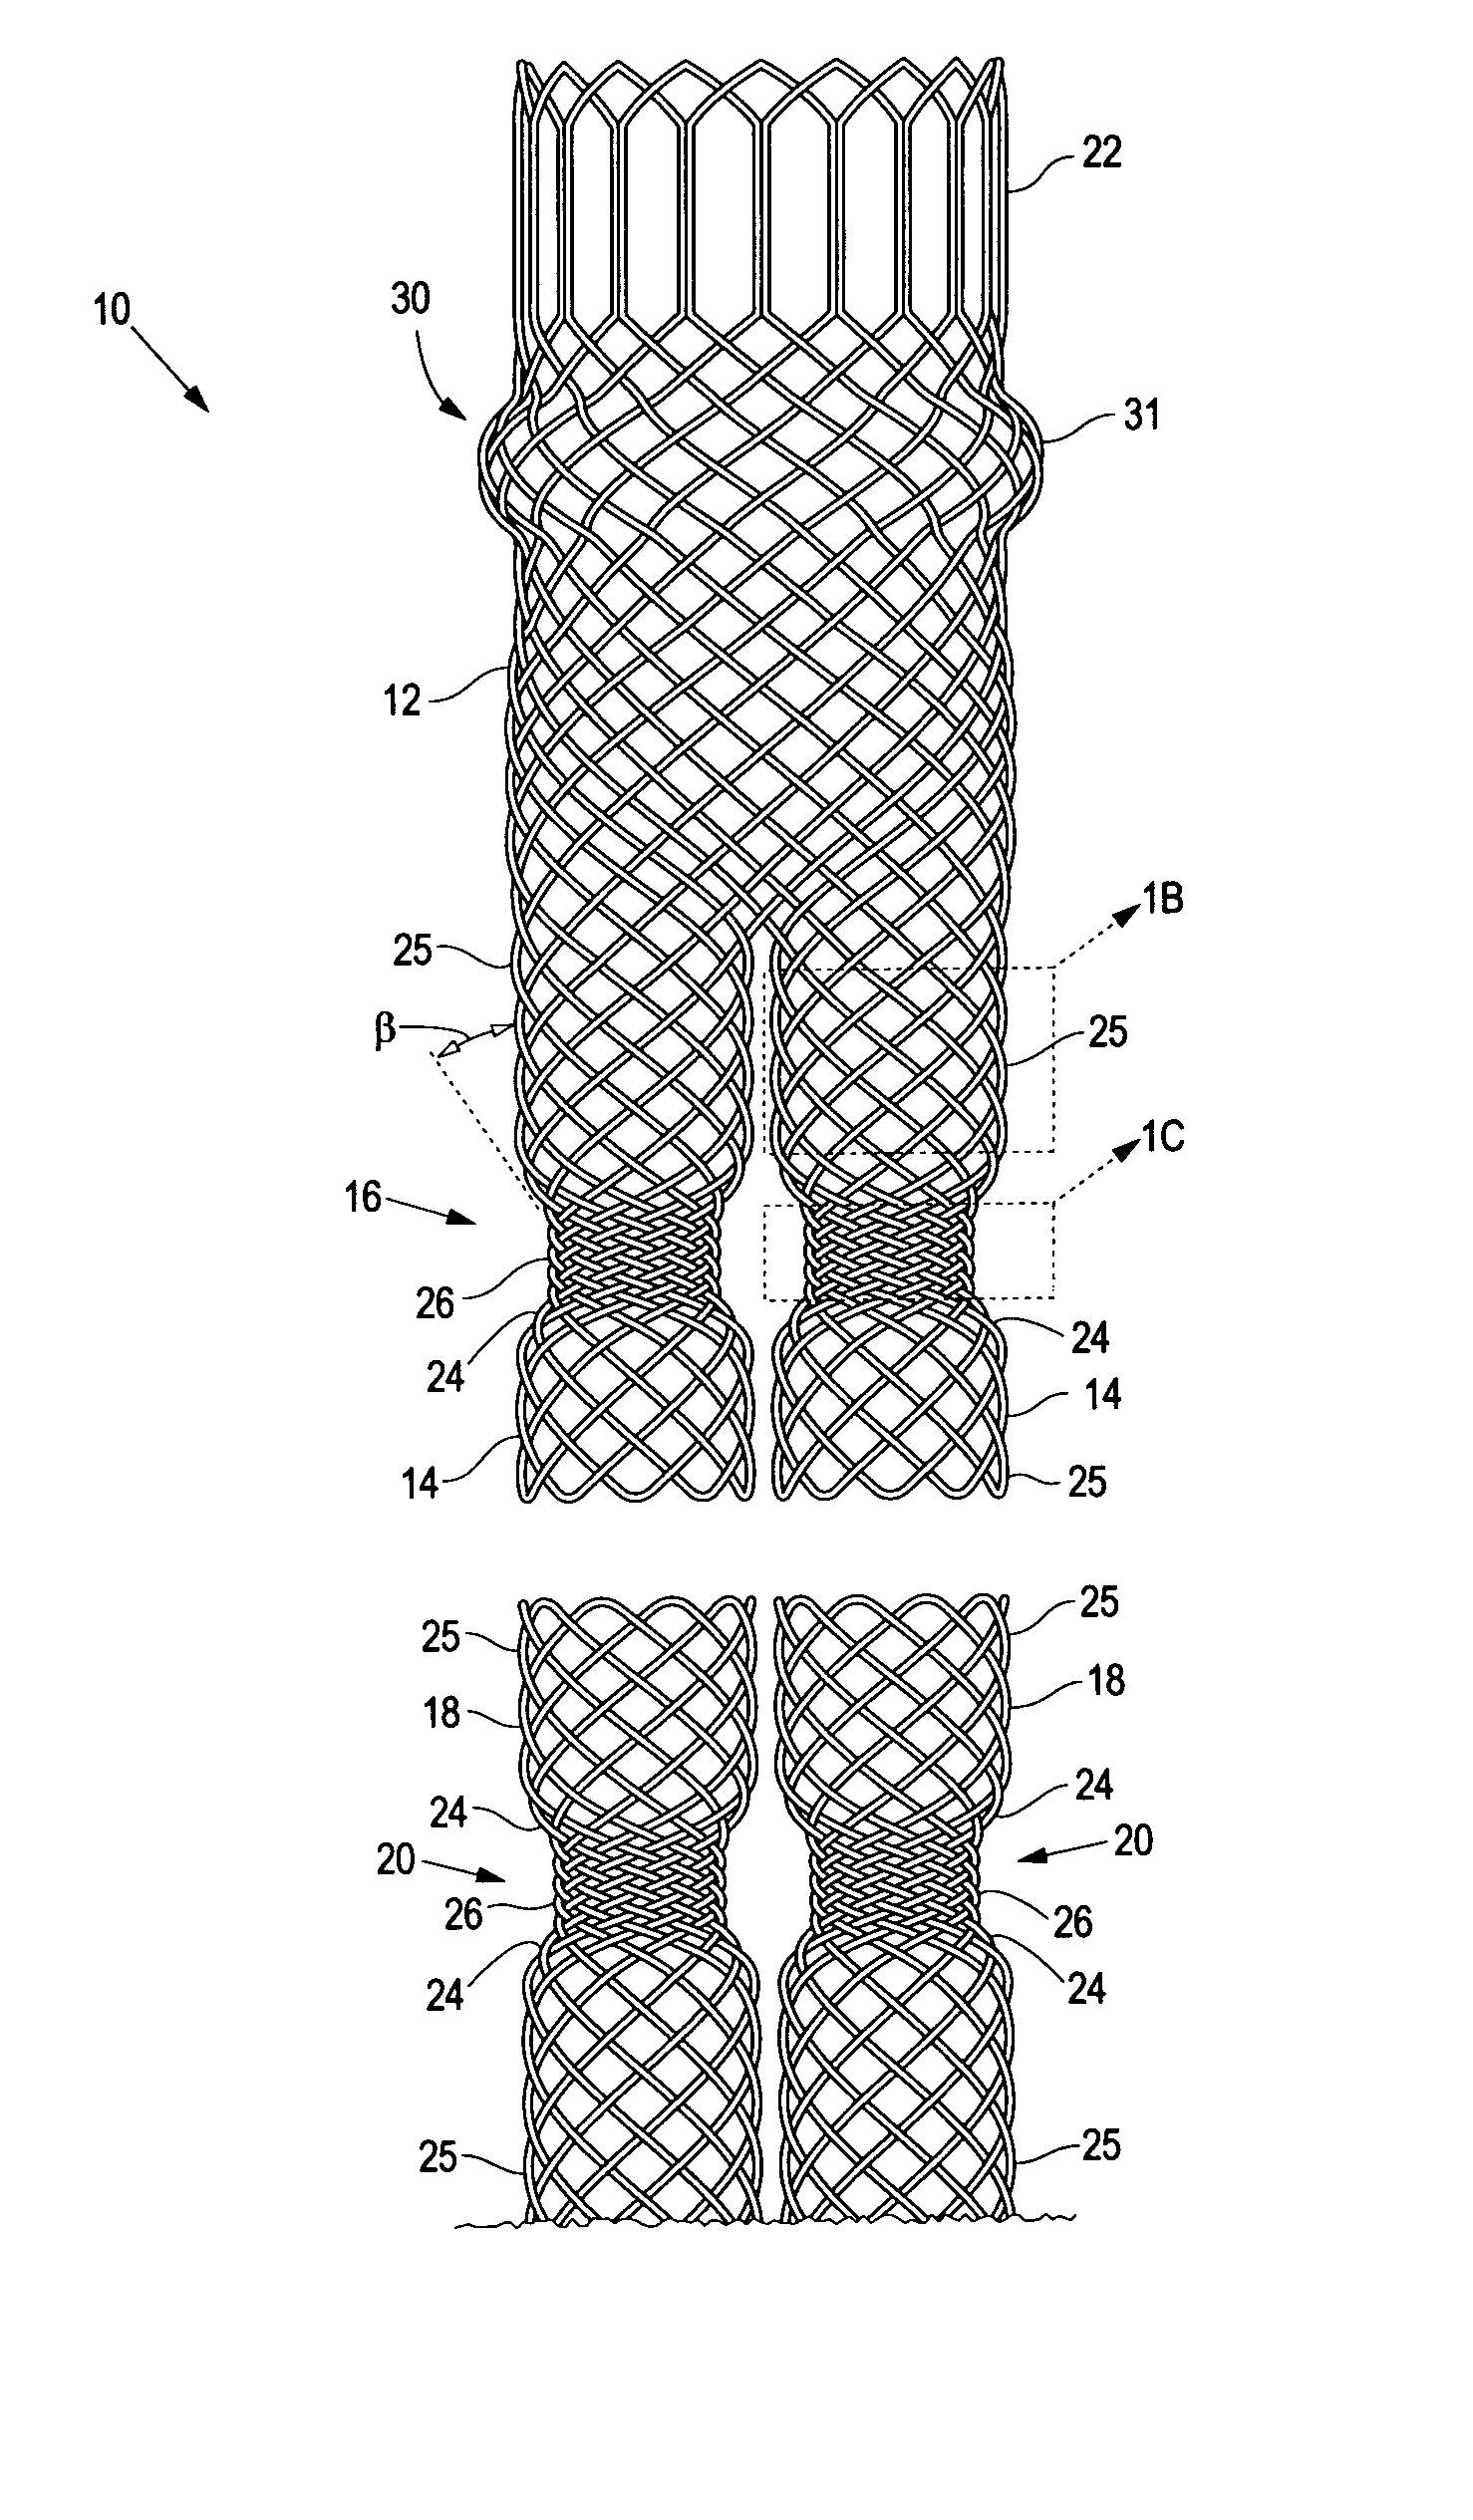 Braided modular stent with hourglass-shaped interfaces